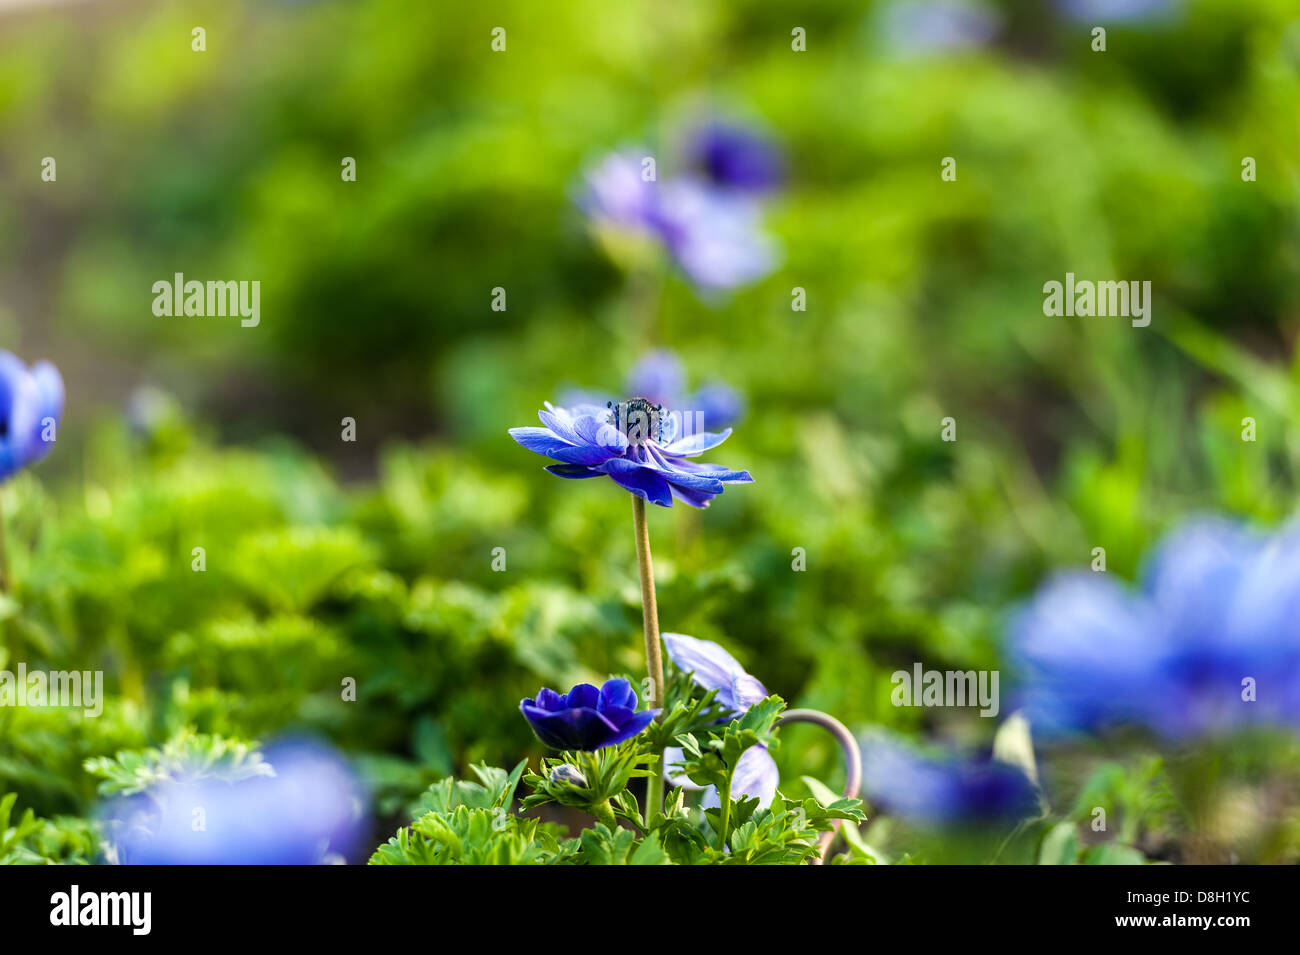 Blue flower and green grass Stock Photo